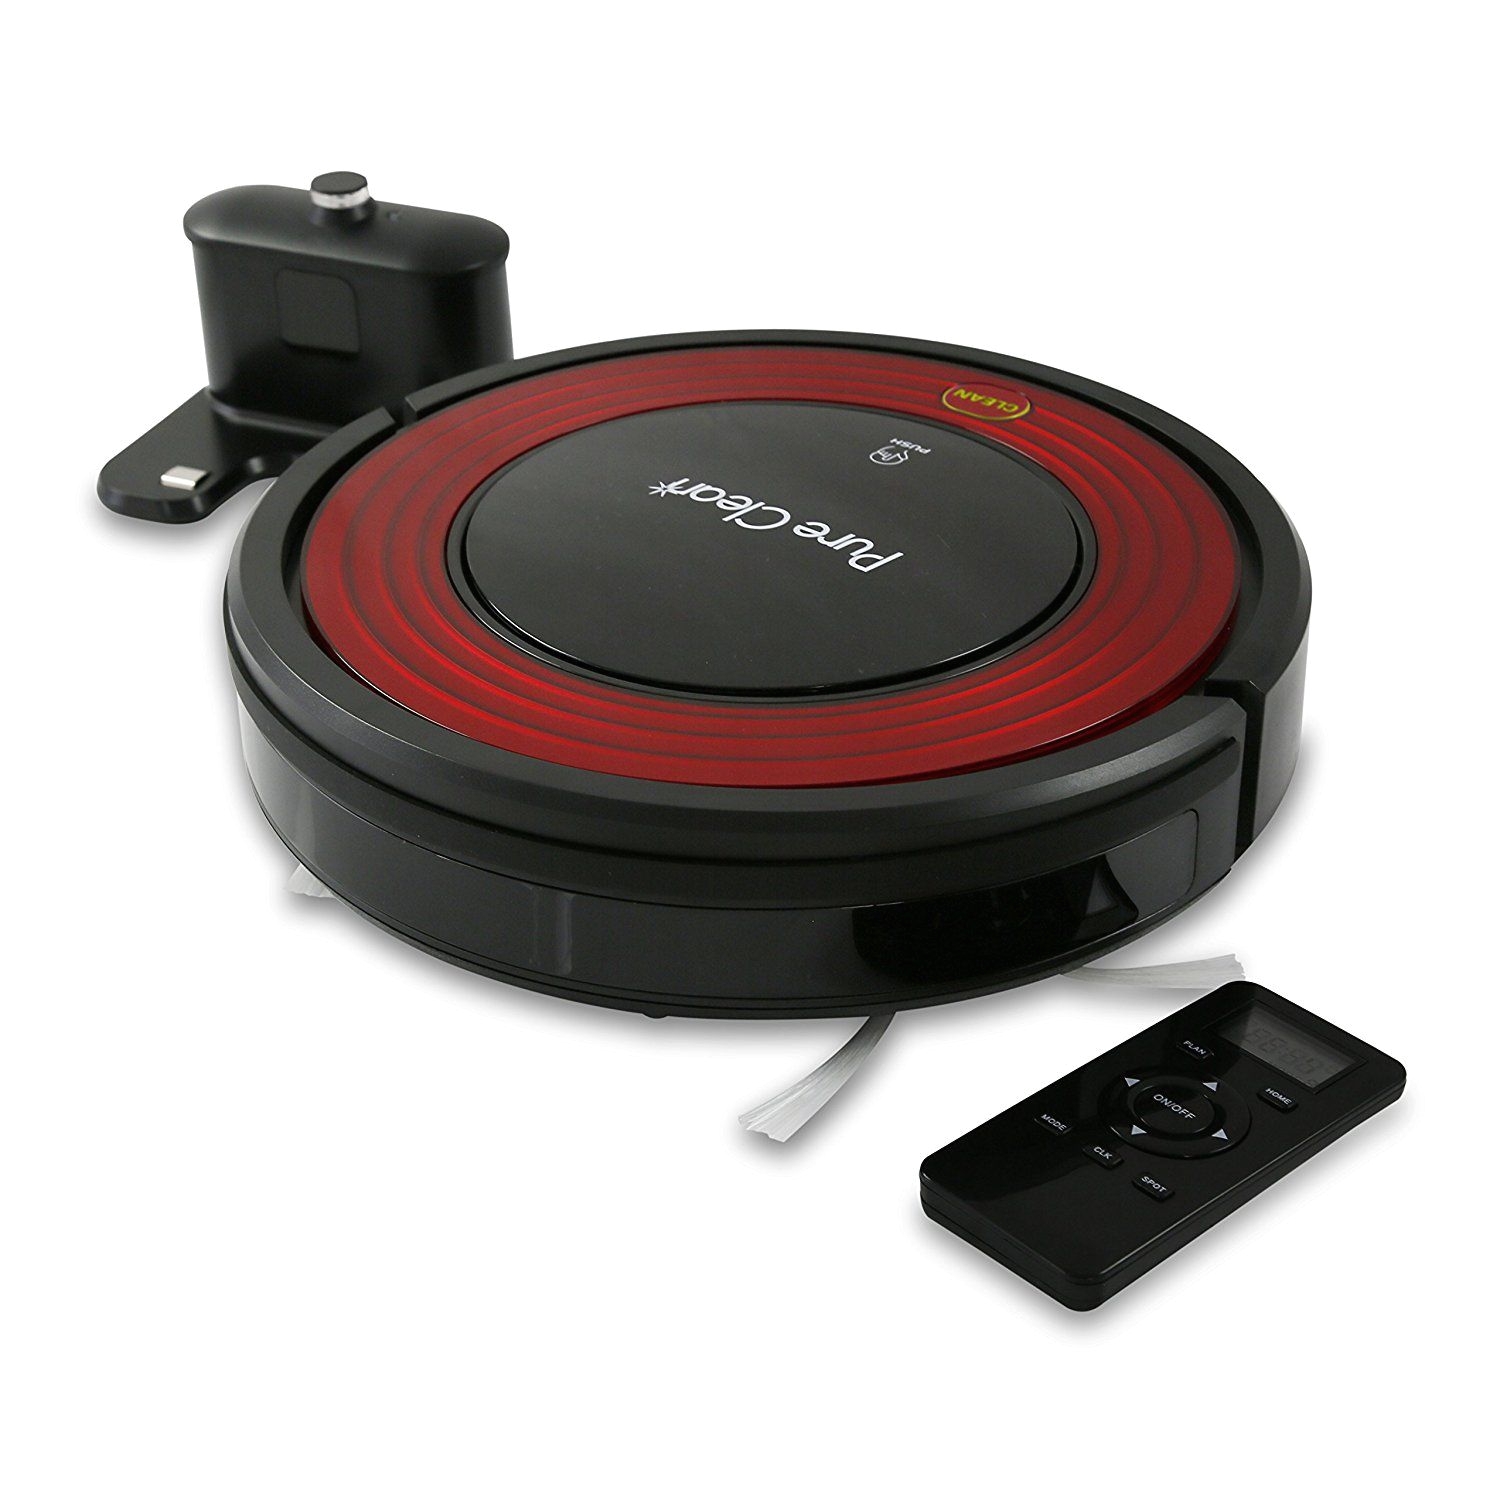 if your home is carpet covered then having the best robotic vacuum for carpet is a sure way to save time and effort vacuuming